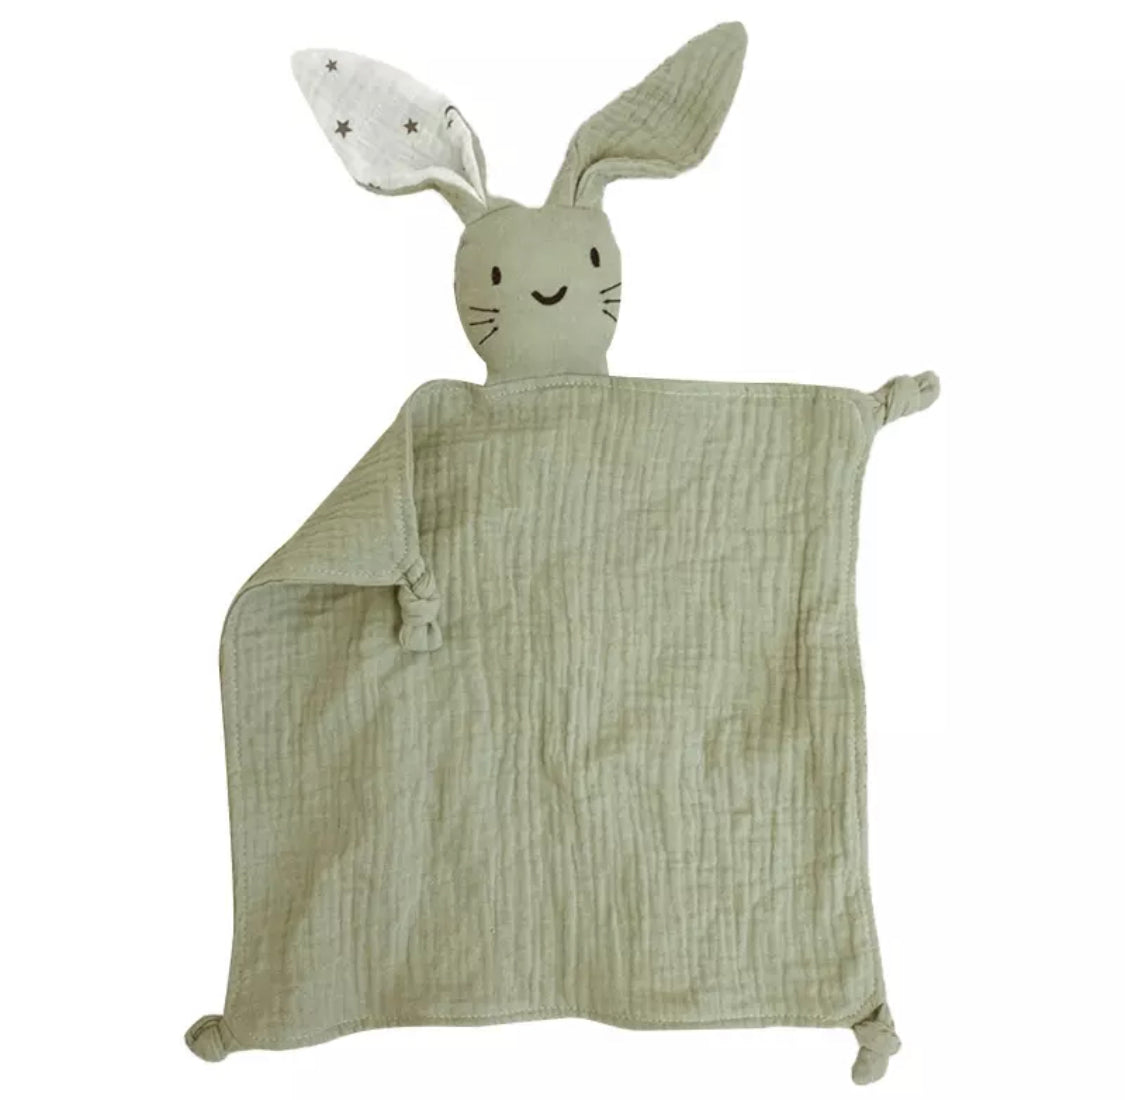 100% Organic Bunny Muslin Cotton comforter. This cute and buttery soft bunny is perfect for snuggling, playtime and sleeping.